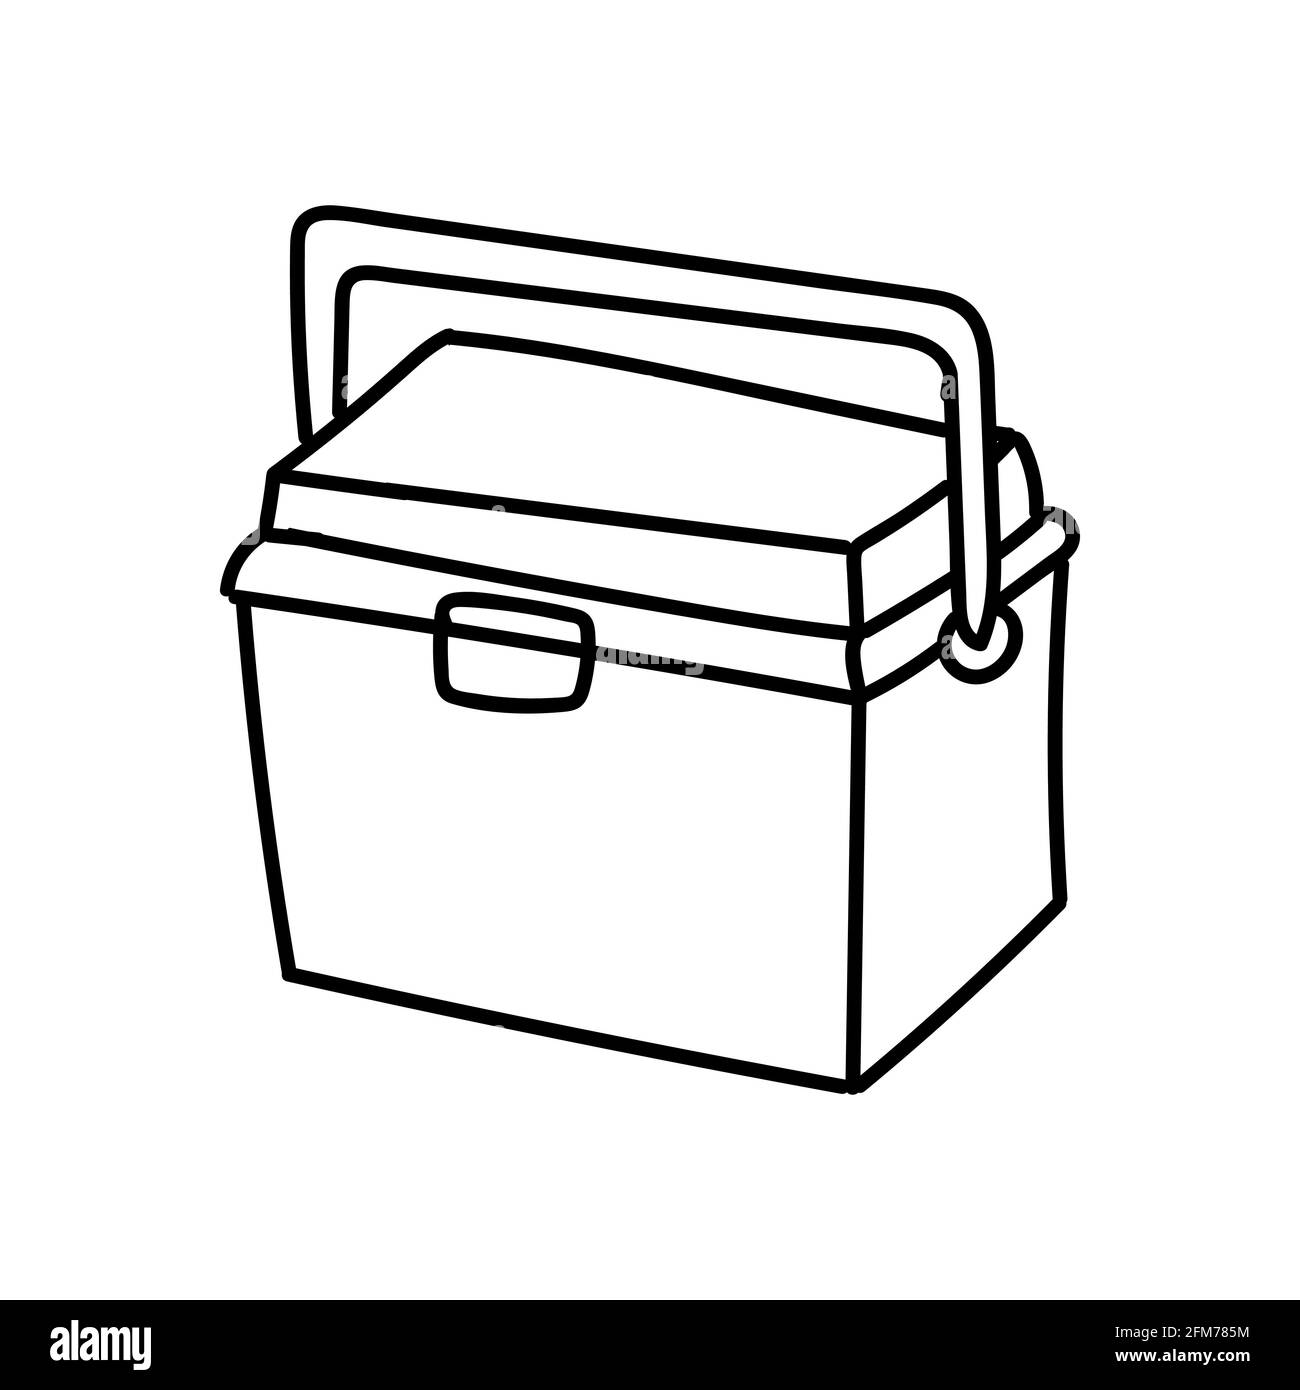 Cooler bag icon in doodle style vector Stock Vector